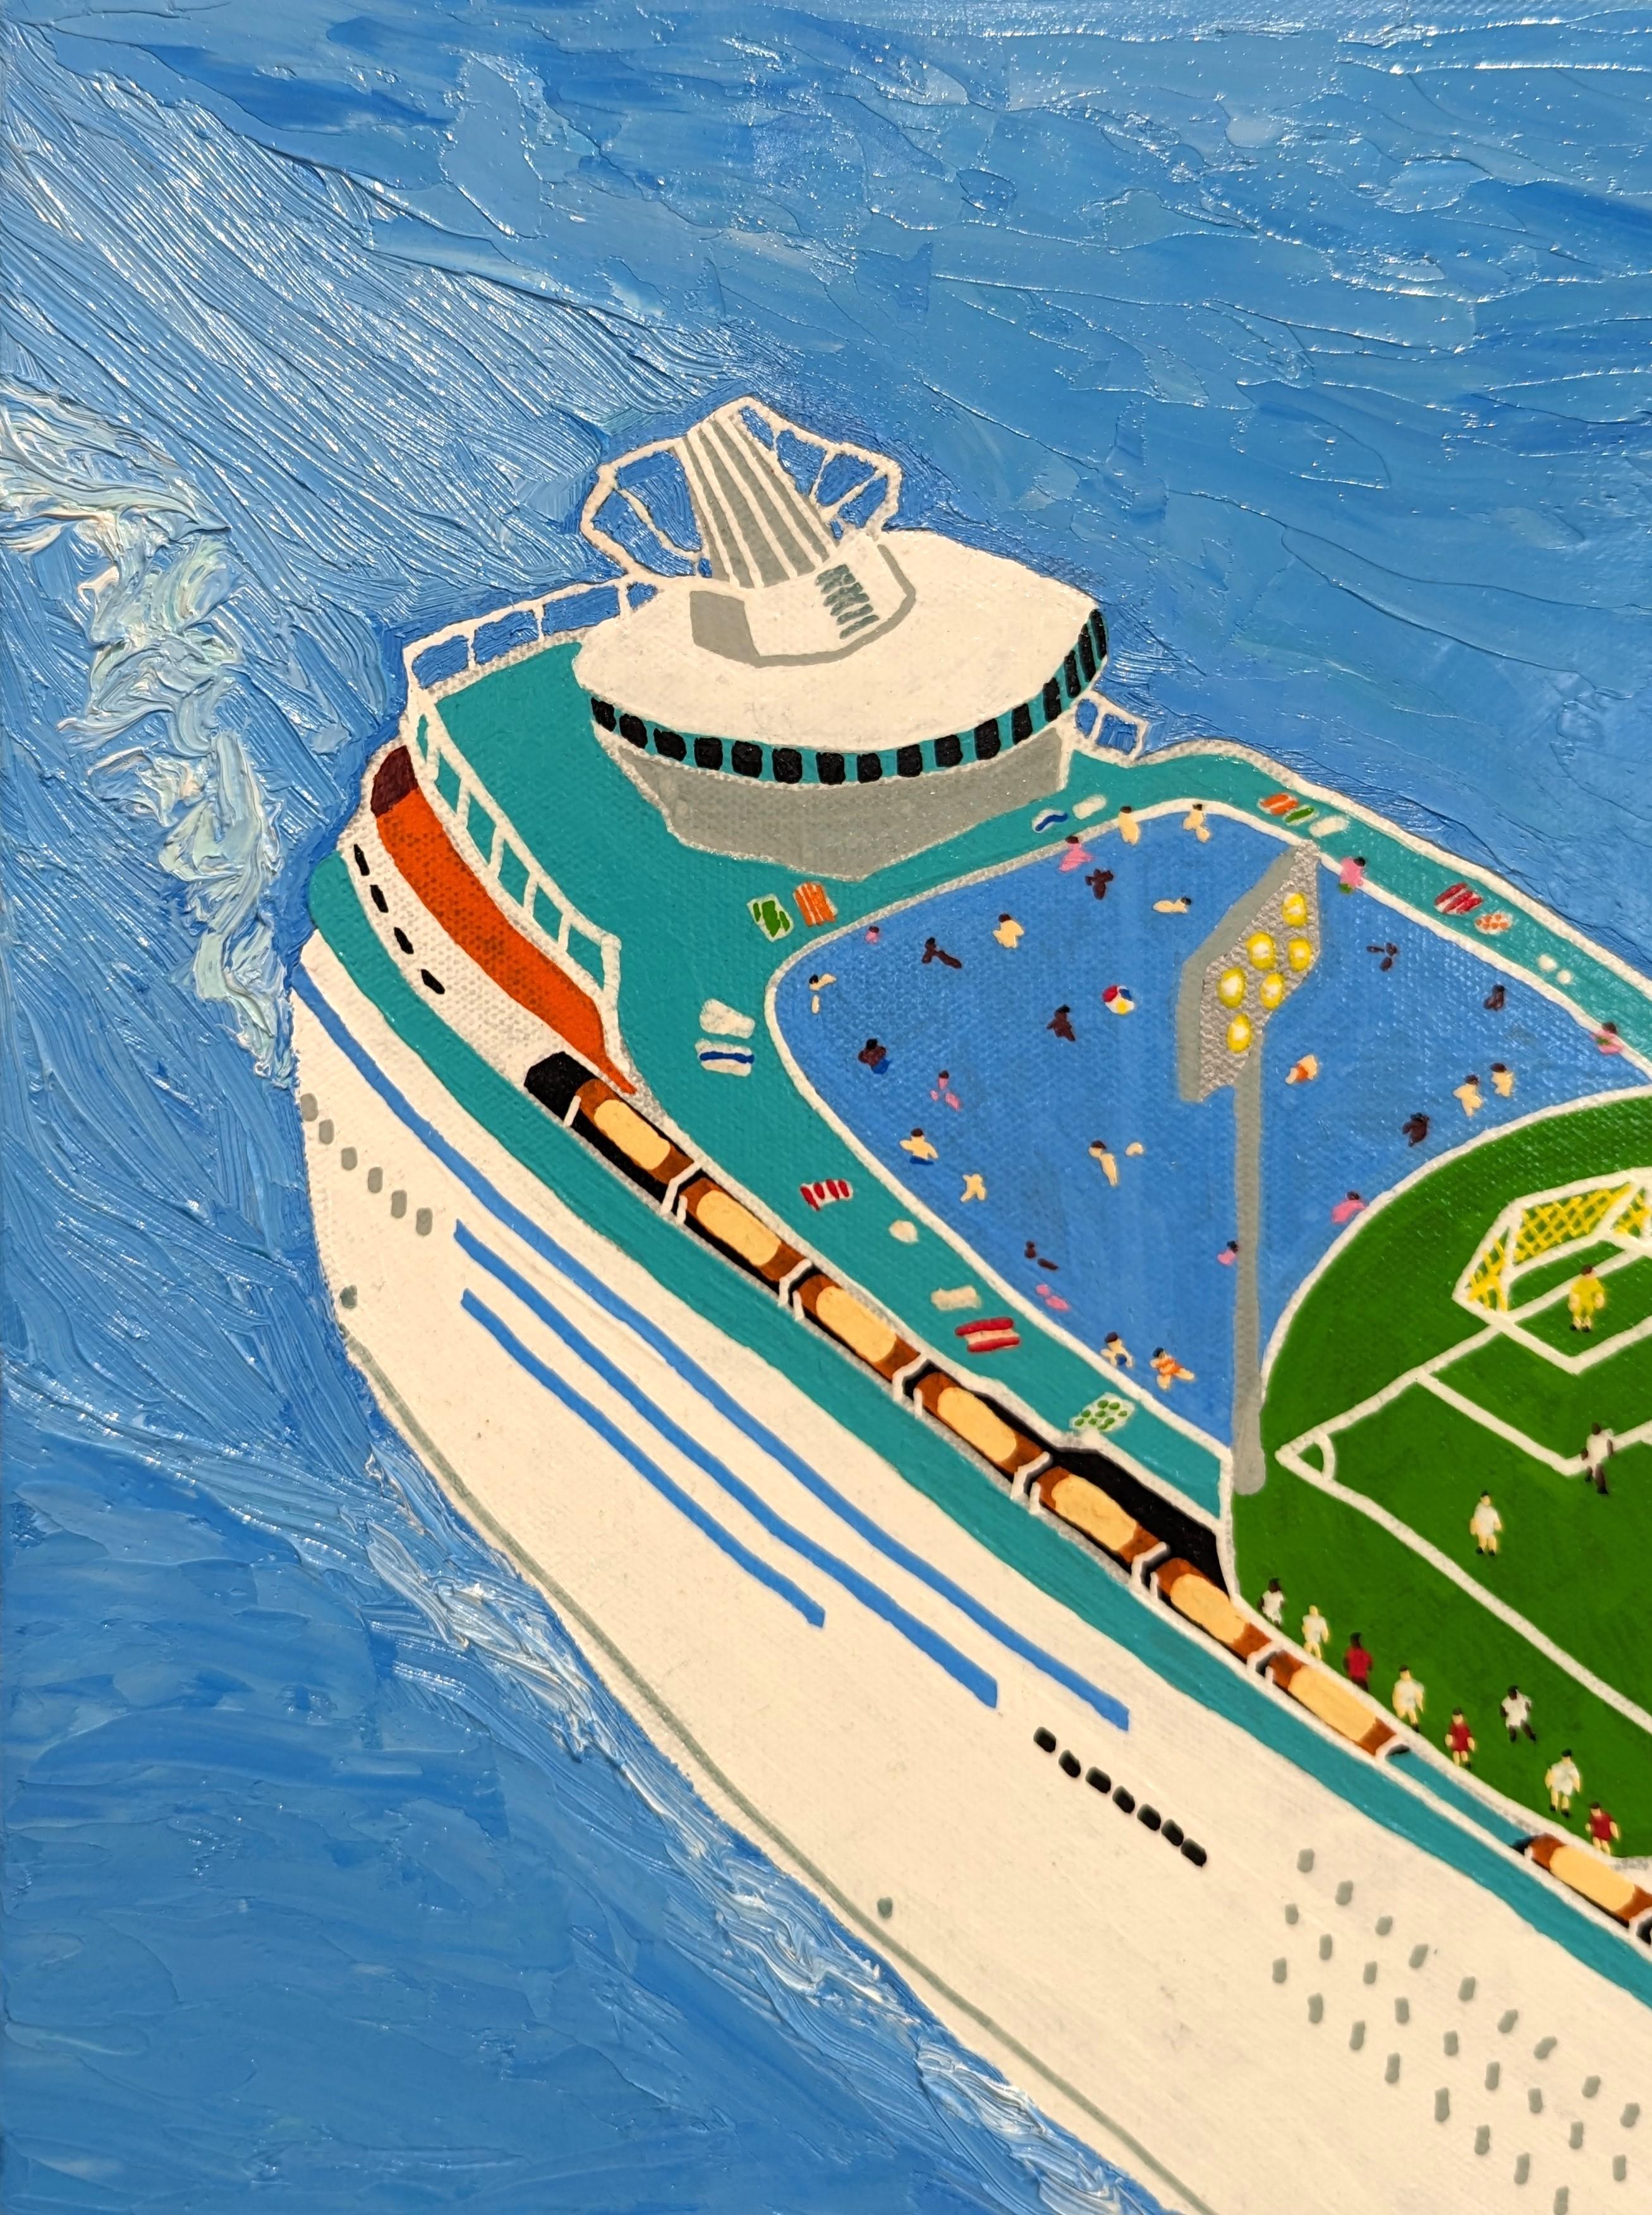 Das ist wohl das Spiel The Colorful Contemporary Humorous Ship Landscape Painting im Angebot 2